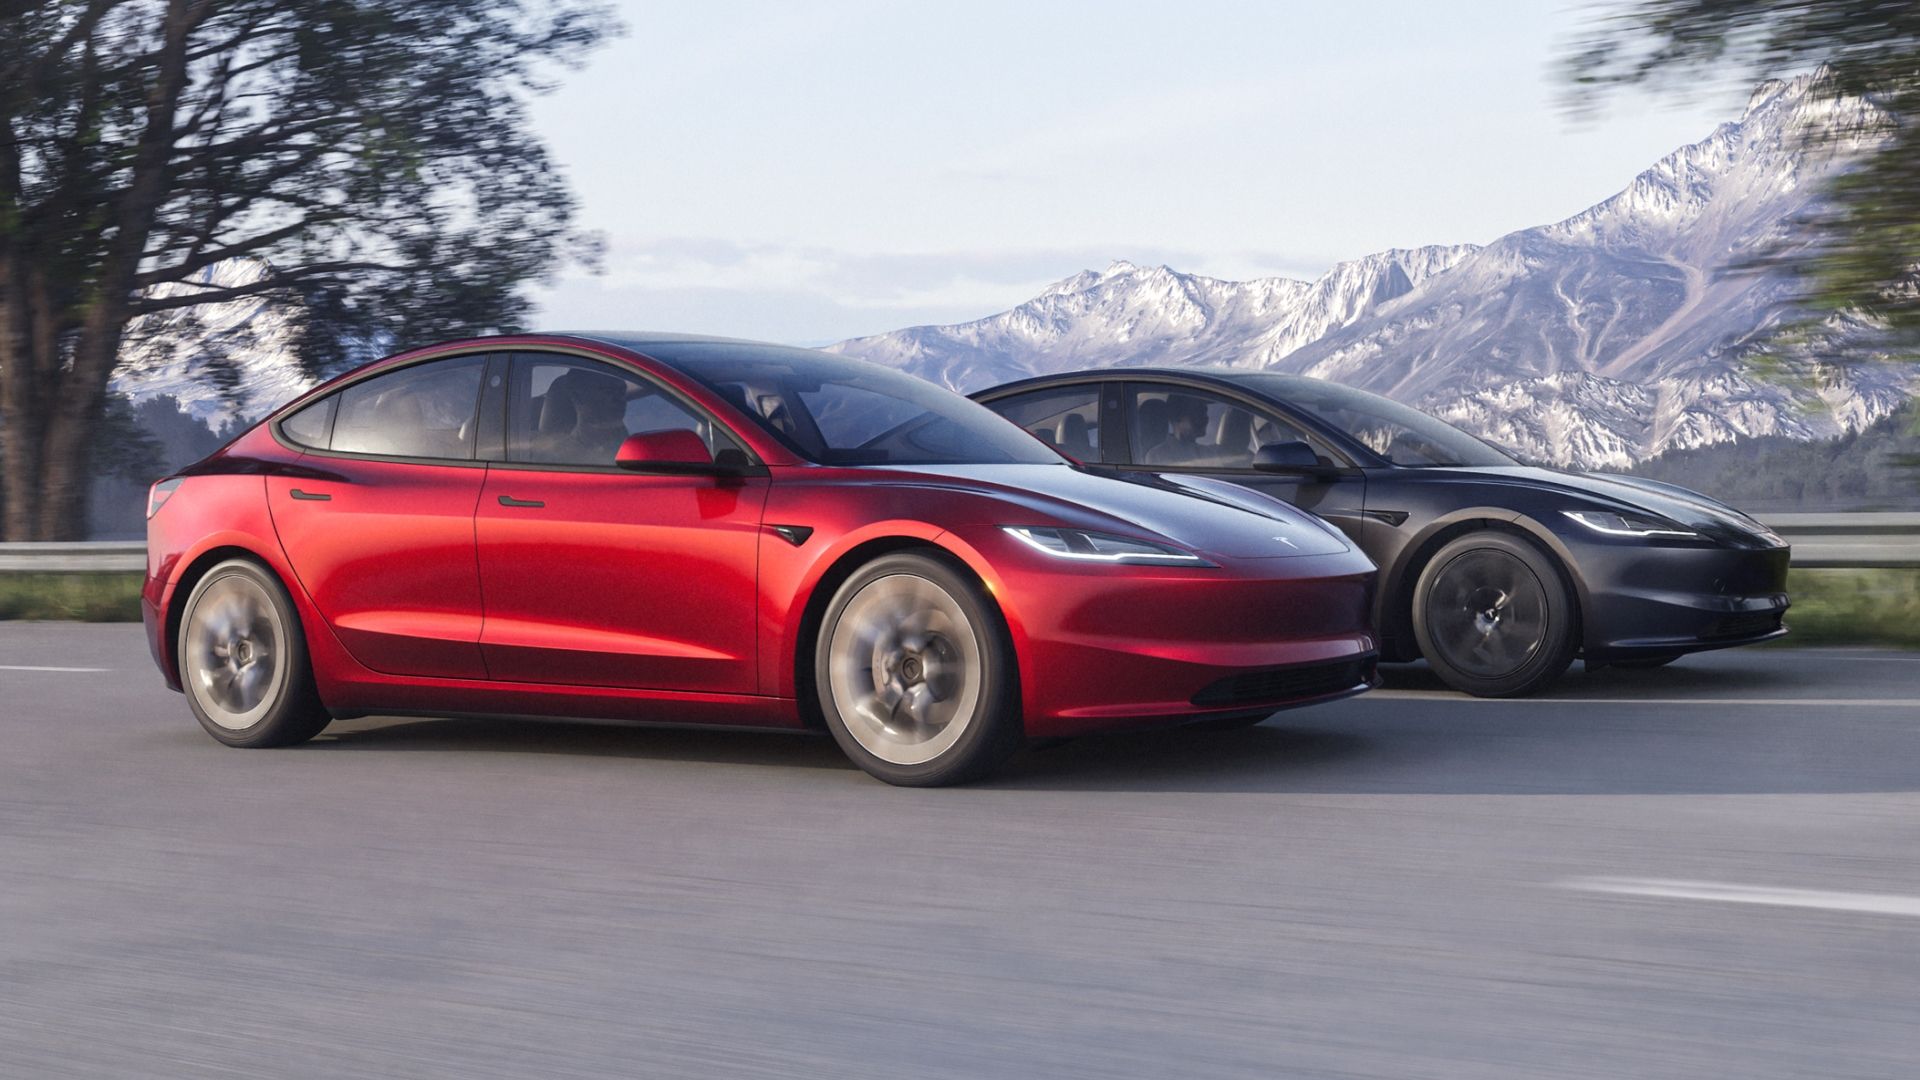 Gray and red Tesla Model 3 